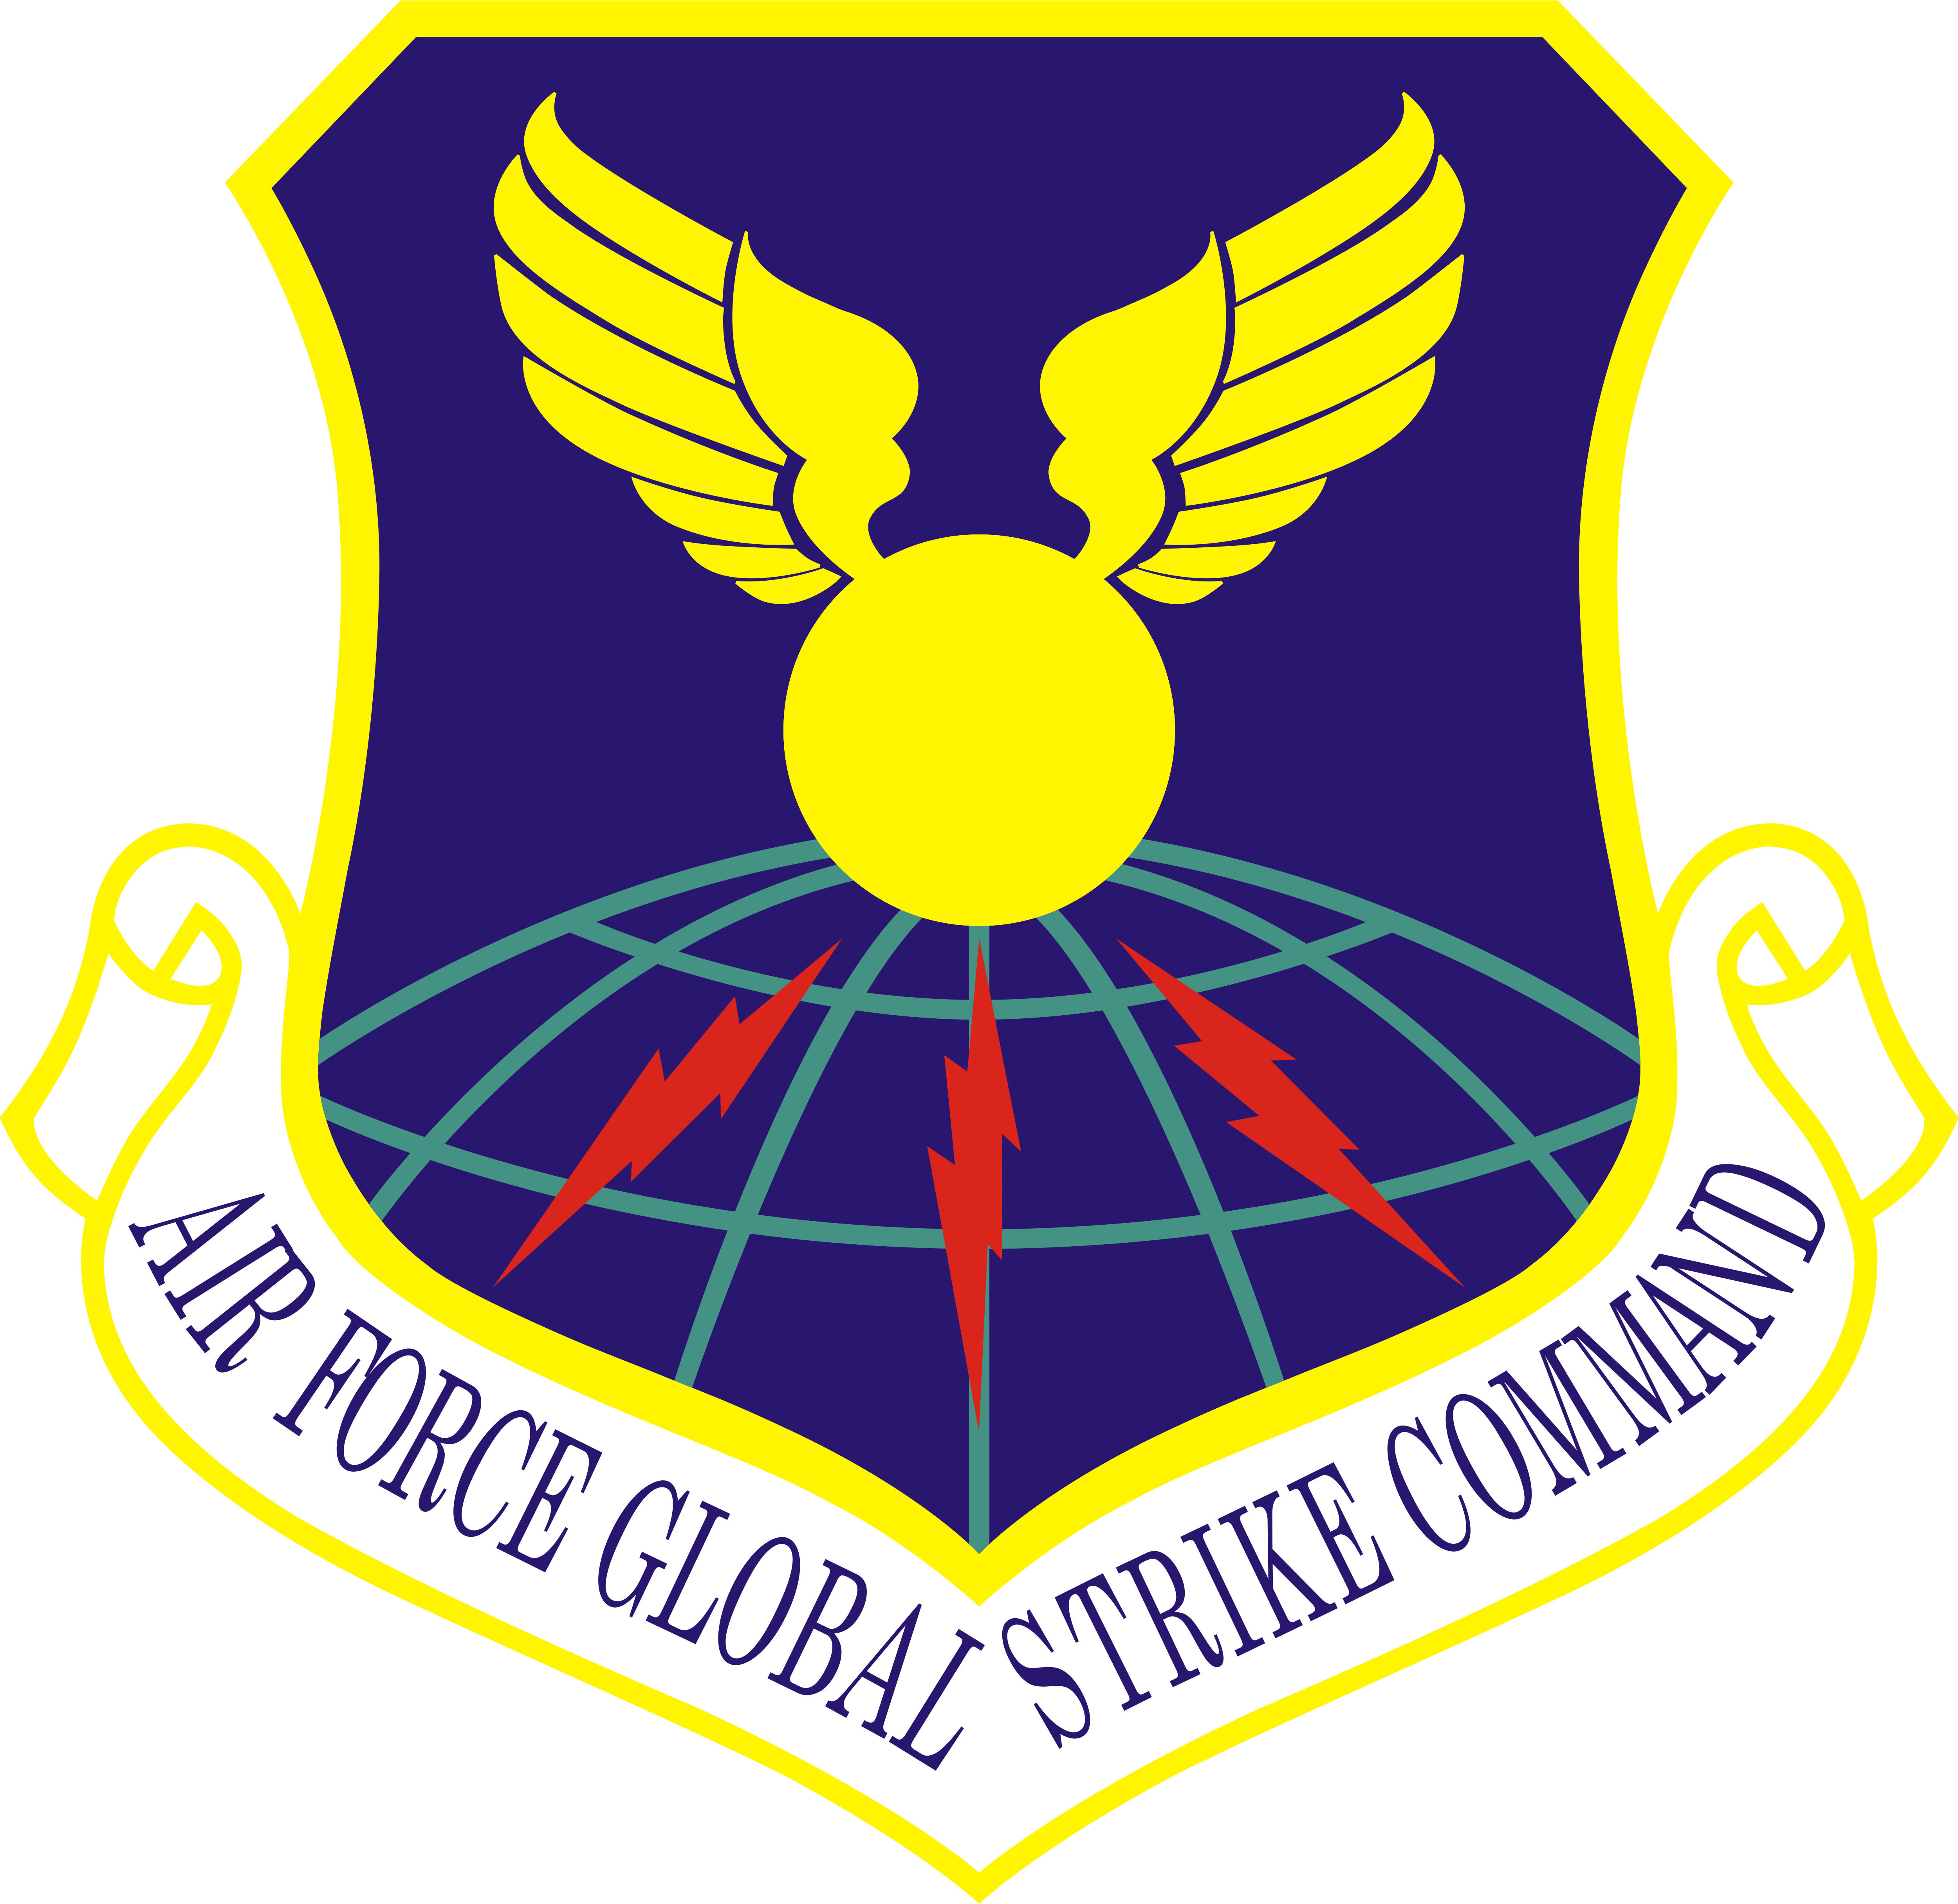 Download Full Image - Air Force Global Strike Command (5000x5000)